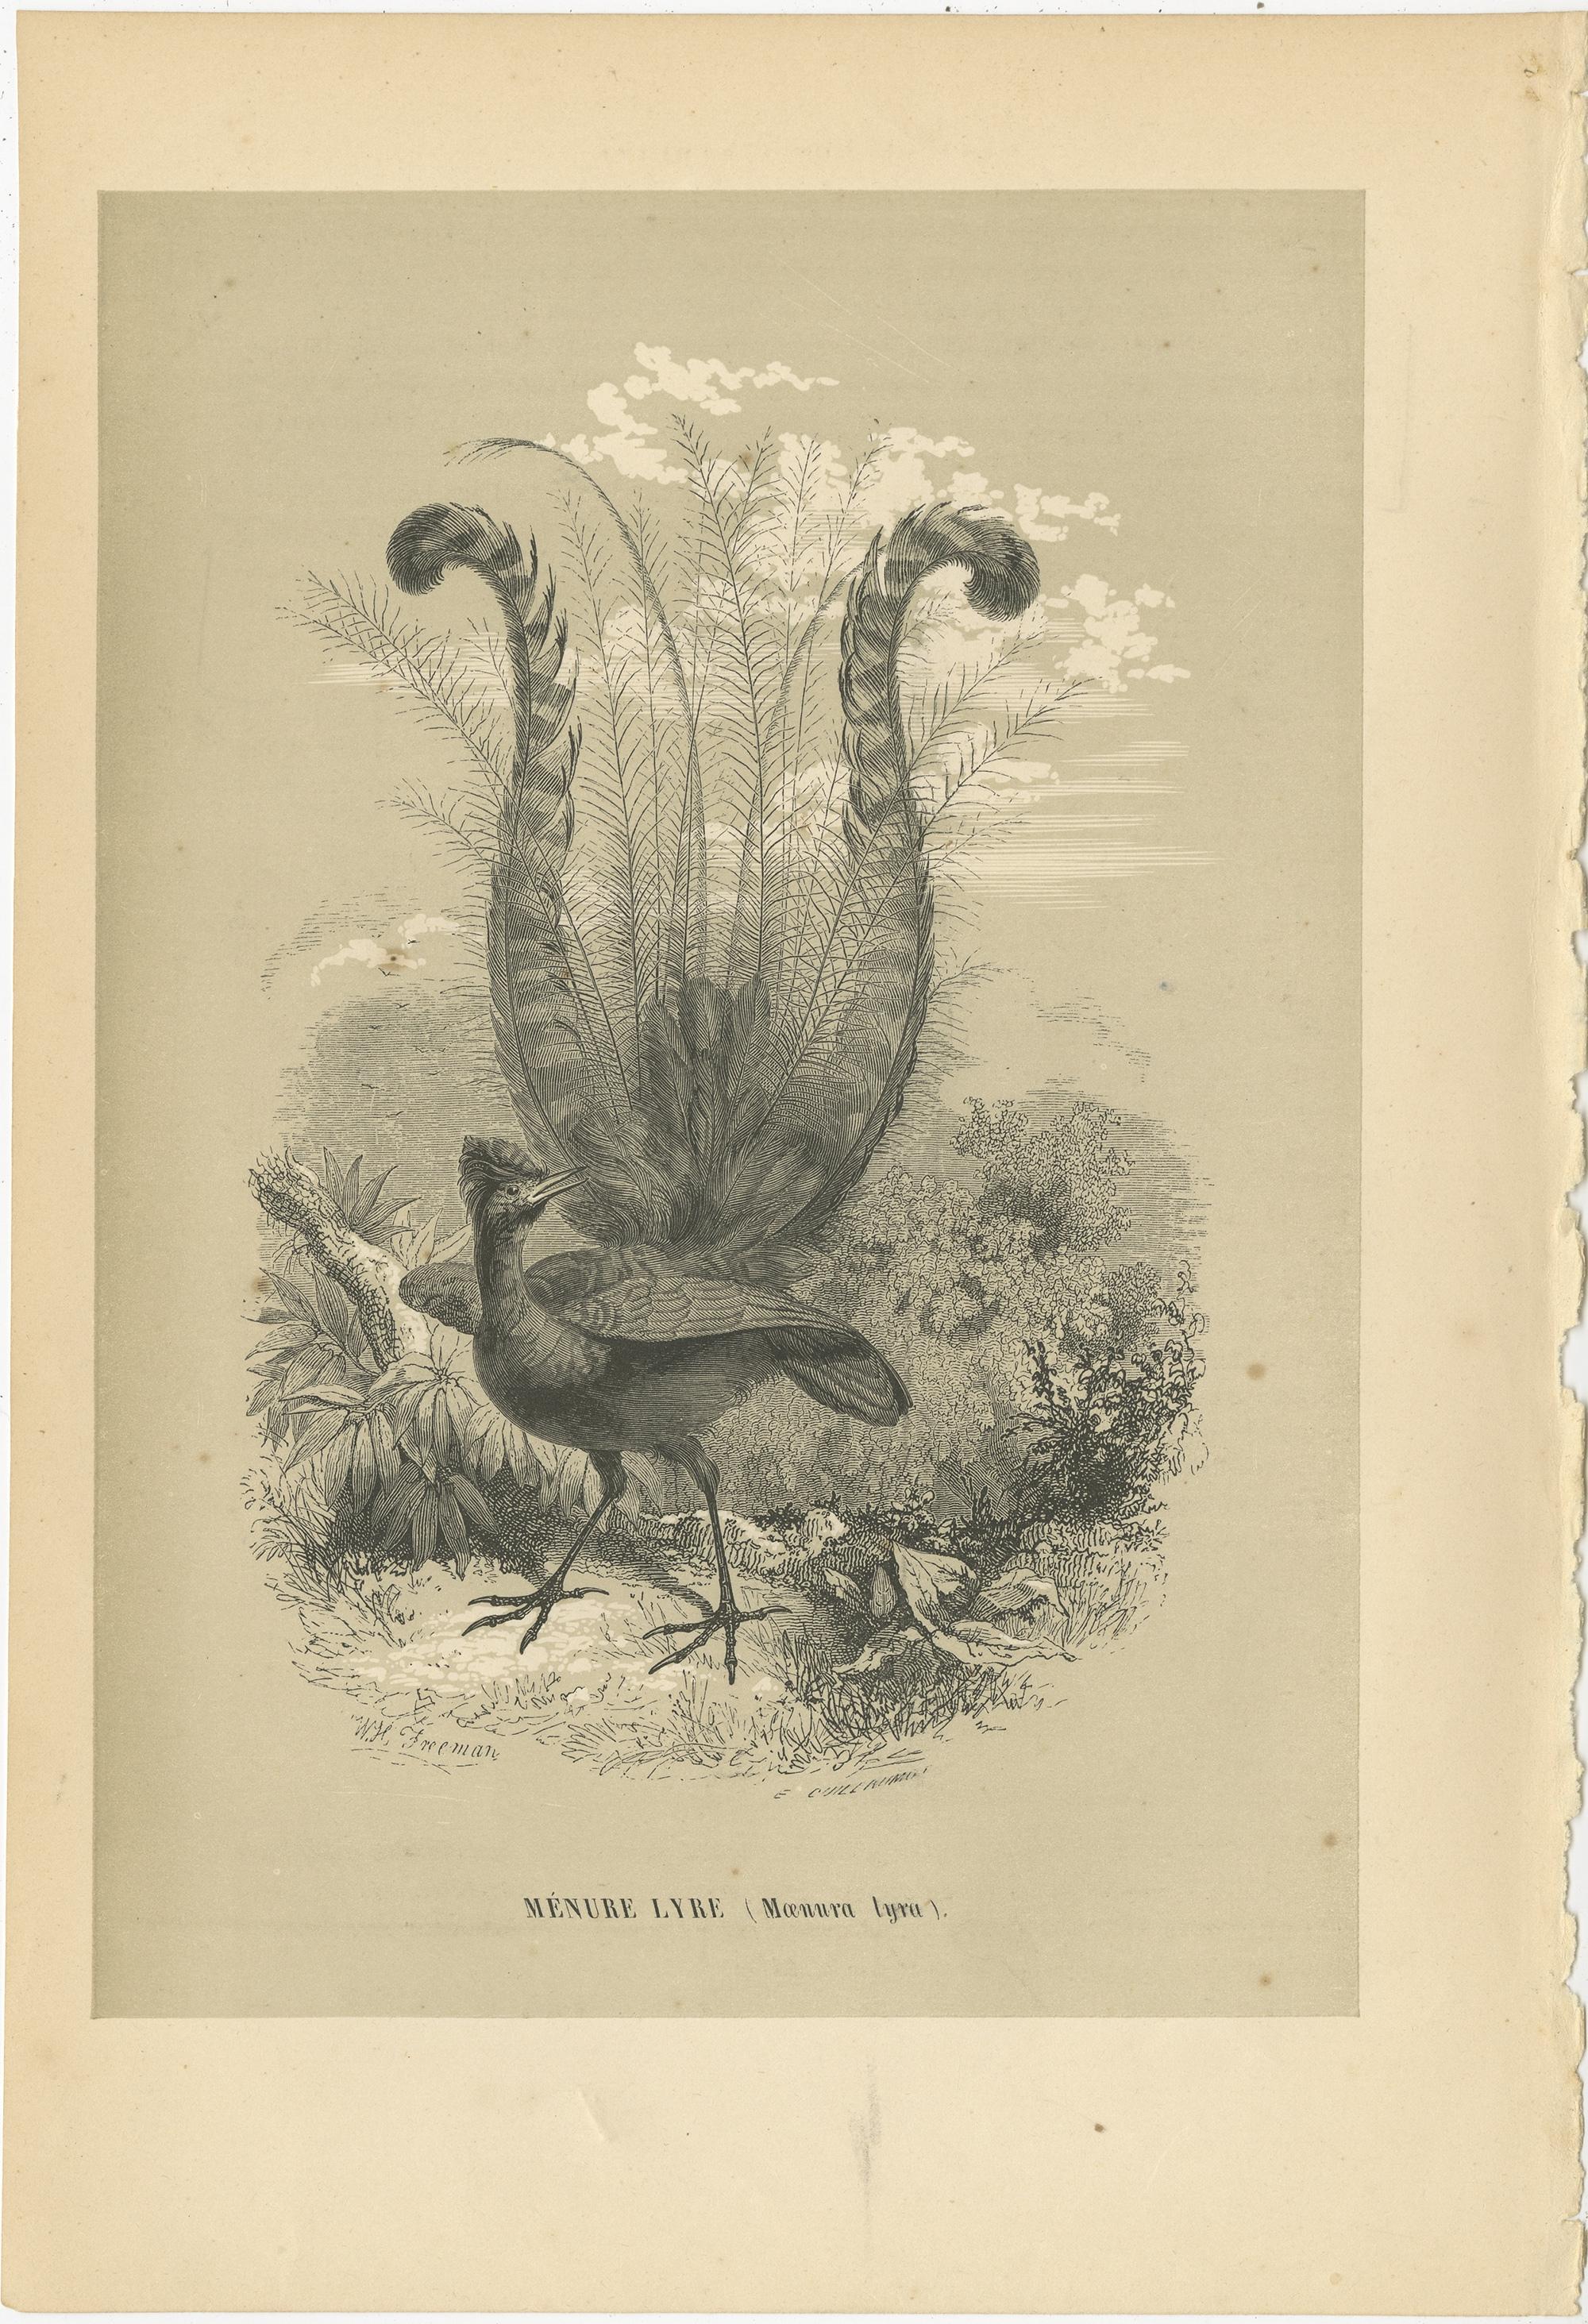 Antique bird print titled 'Ménure Lyre'. Original print of a lyrebird. This print originates from 'Histoire Naturelle des Oiseaux' by M. Emm. le Maout. Published 1853. 

A lyrebird is either of two species of ground-dwelling Australian birds that